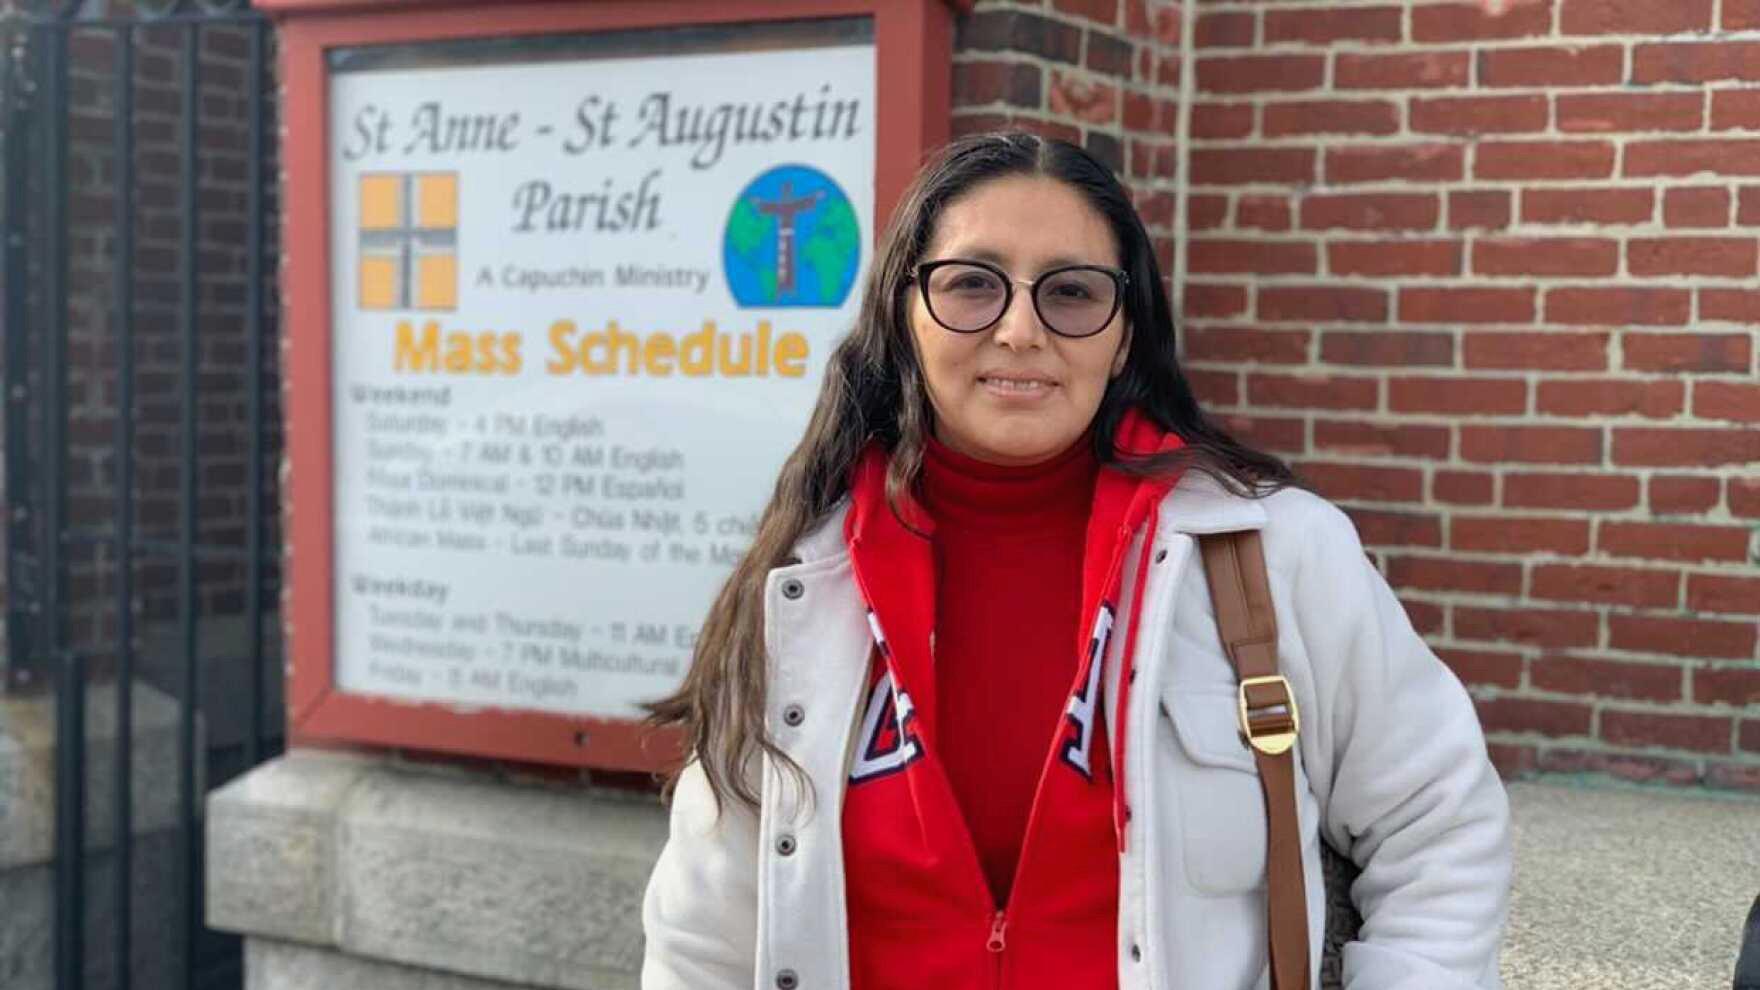 Gissela Yanez in her first day of English classes at St. Anne-St. Augustin Parish in Manchester, New Hampshire.